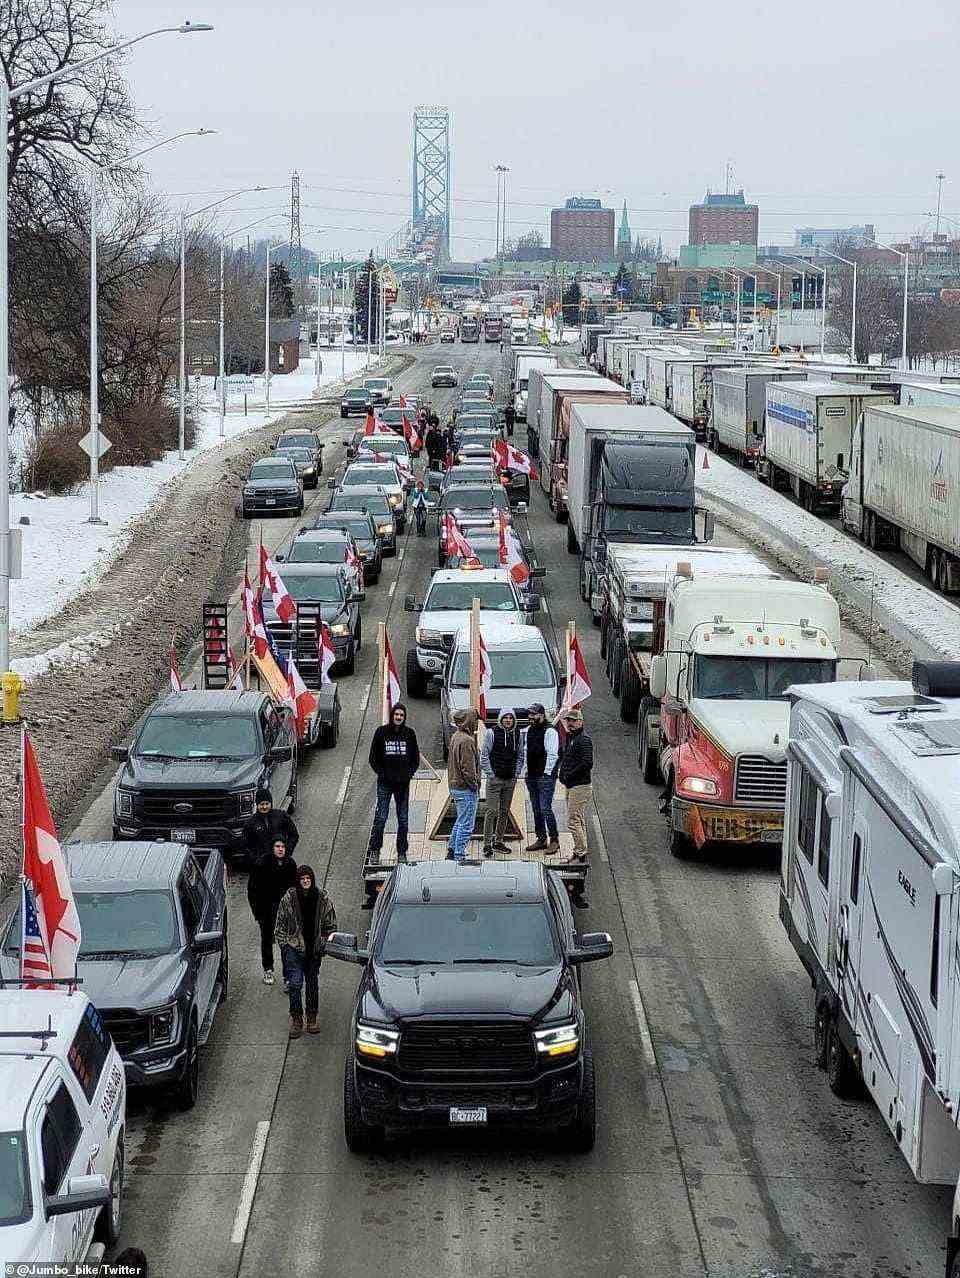 One lane from Canada into the United States opened Tuesday morning, but the US side remains closed